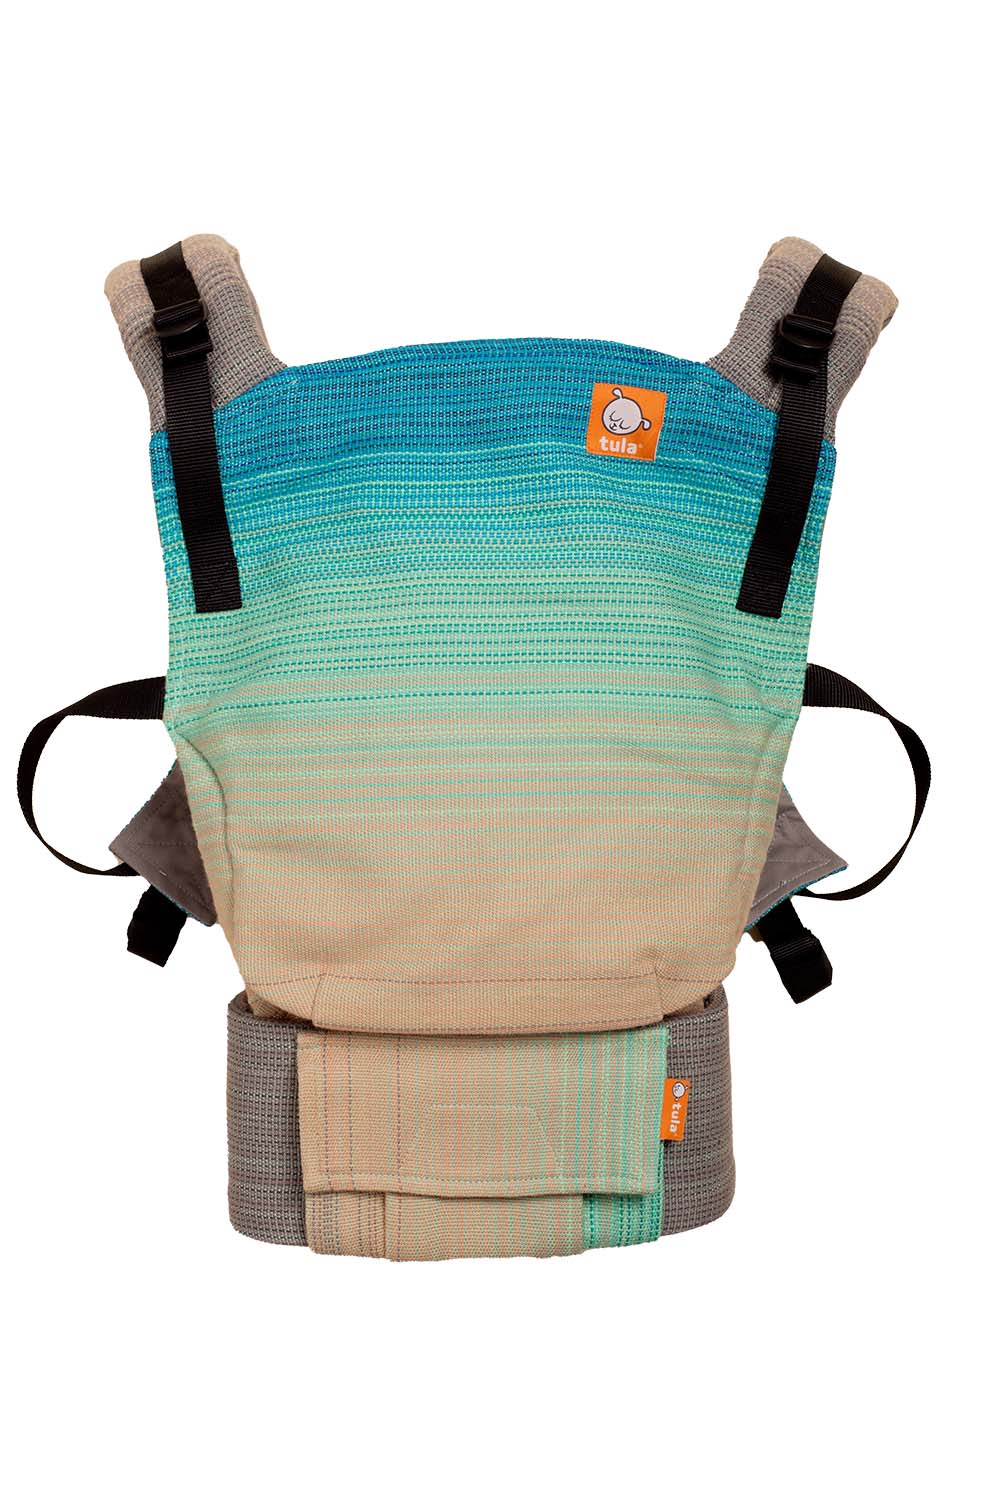 Longest Day of the Year - Signature Handwoven Free-to-Grow Baby Carrier